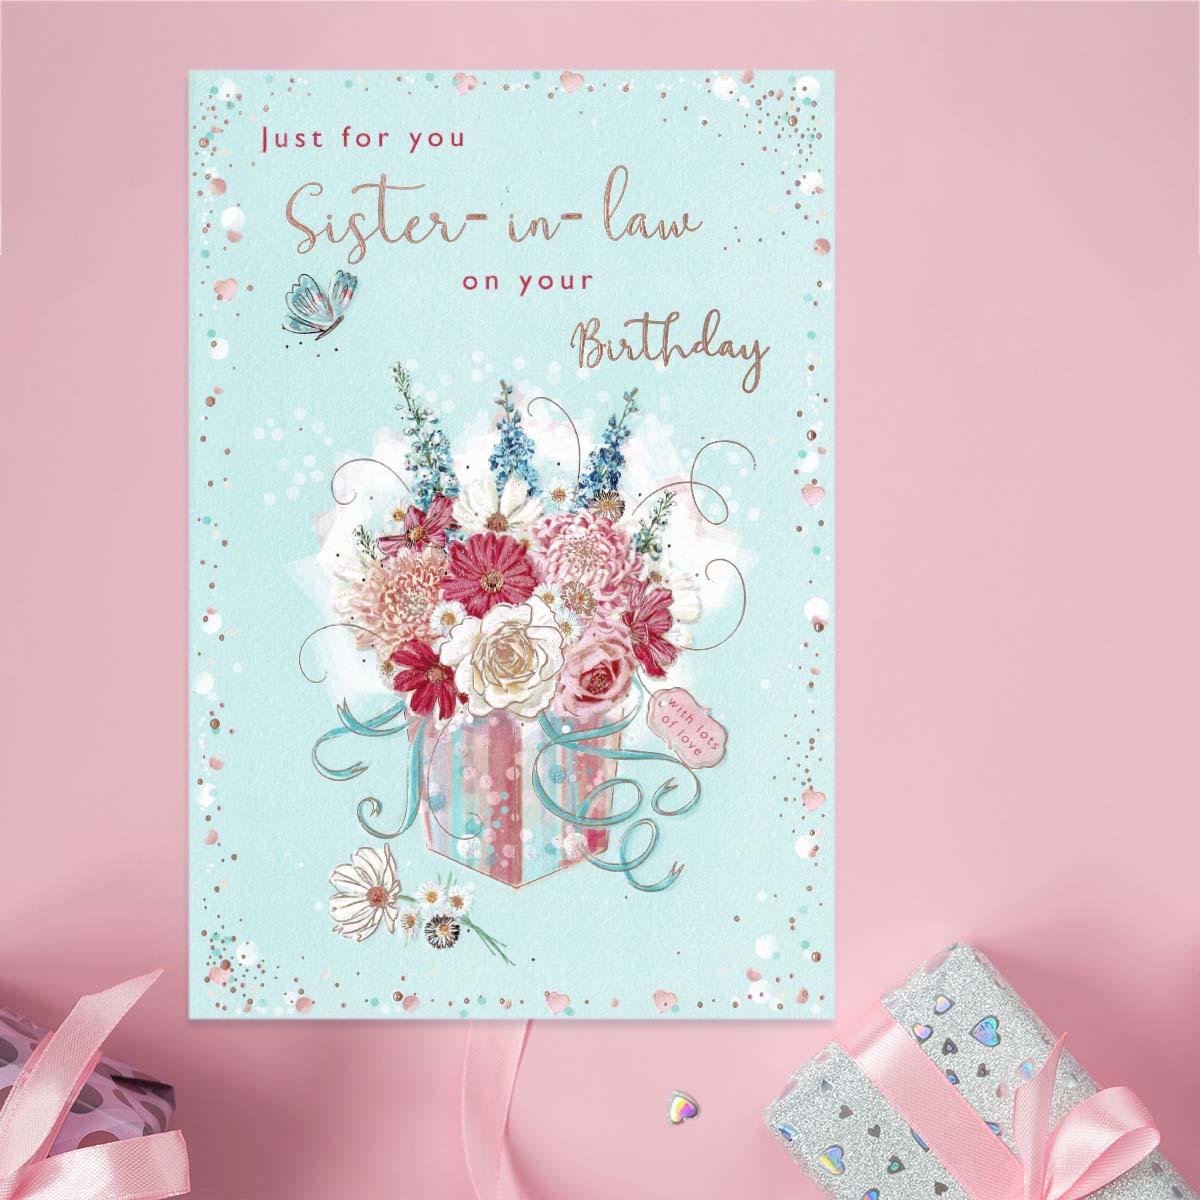 Sister In Law Floral Present Birthday Card Sitting On A Display Shelf